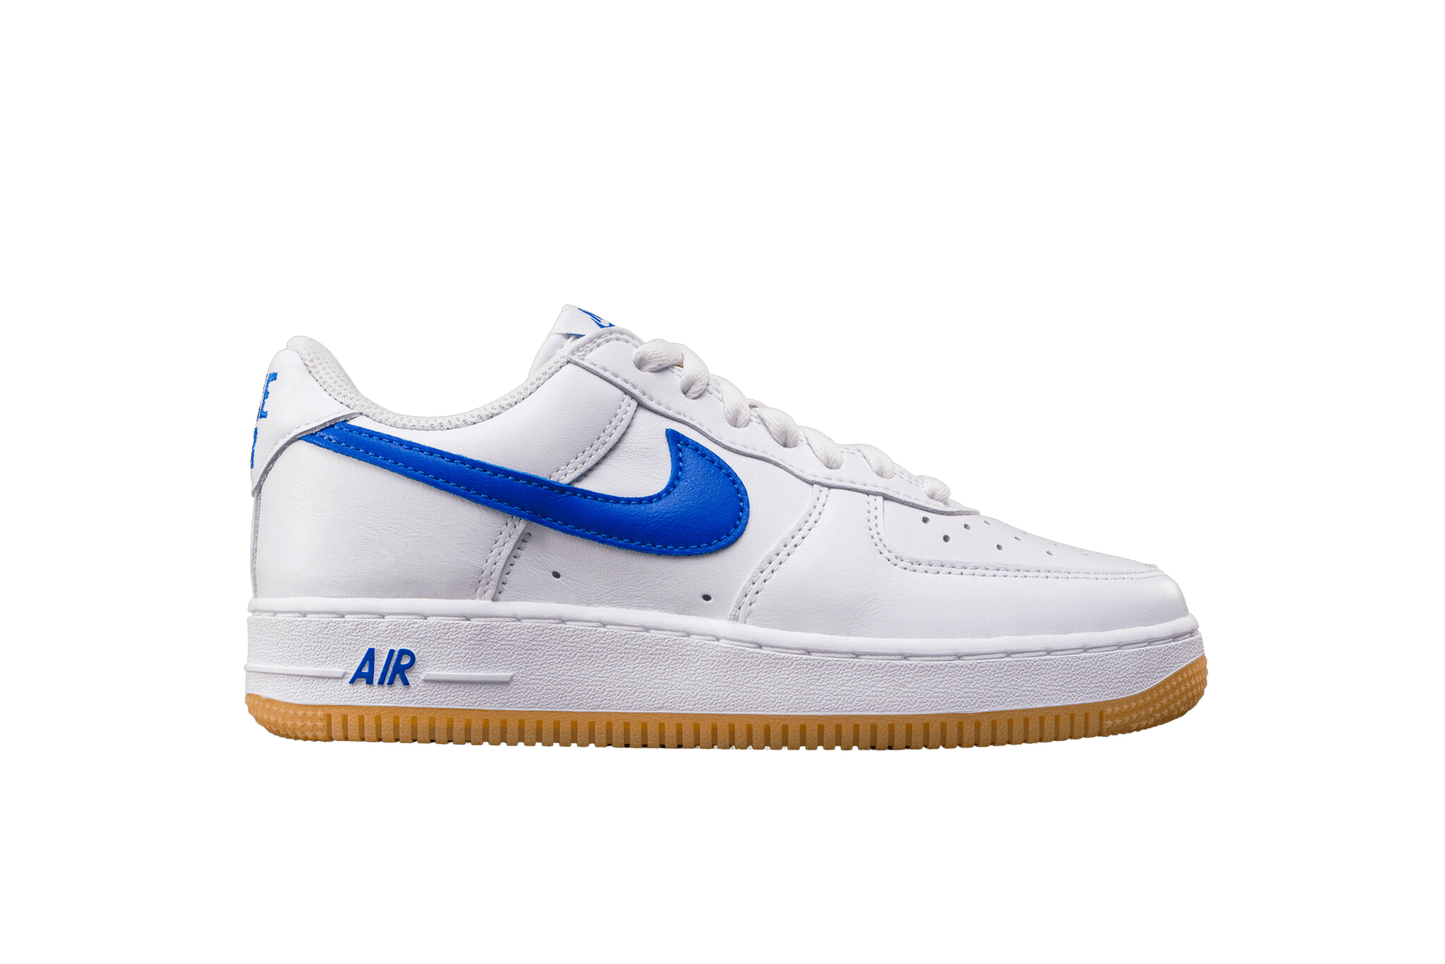 nike air force 1 07 low color of the month varsity royal gum lo10m 7 1445x